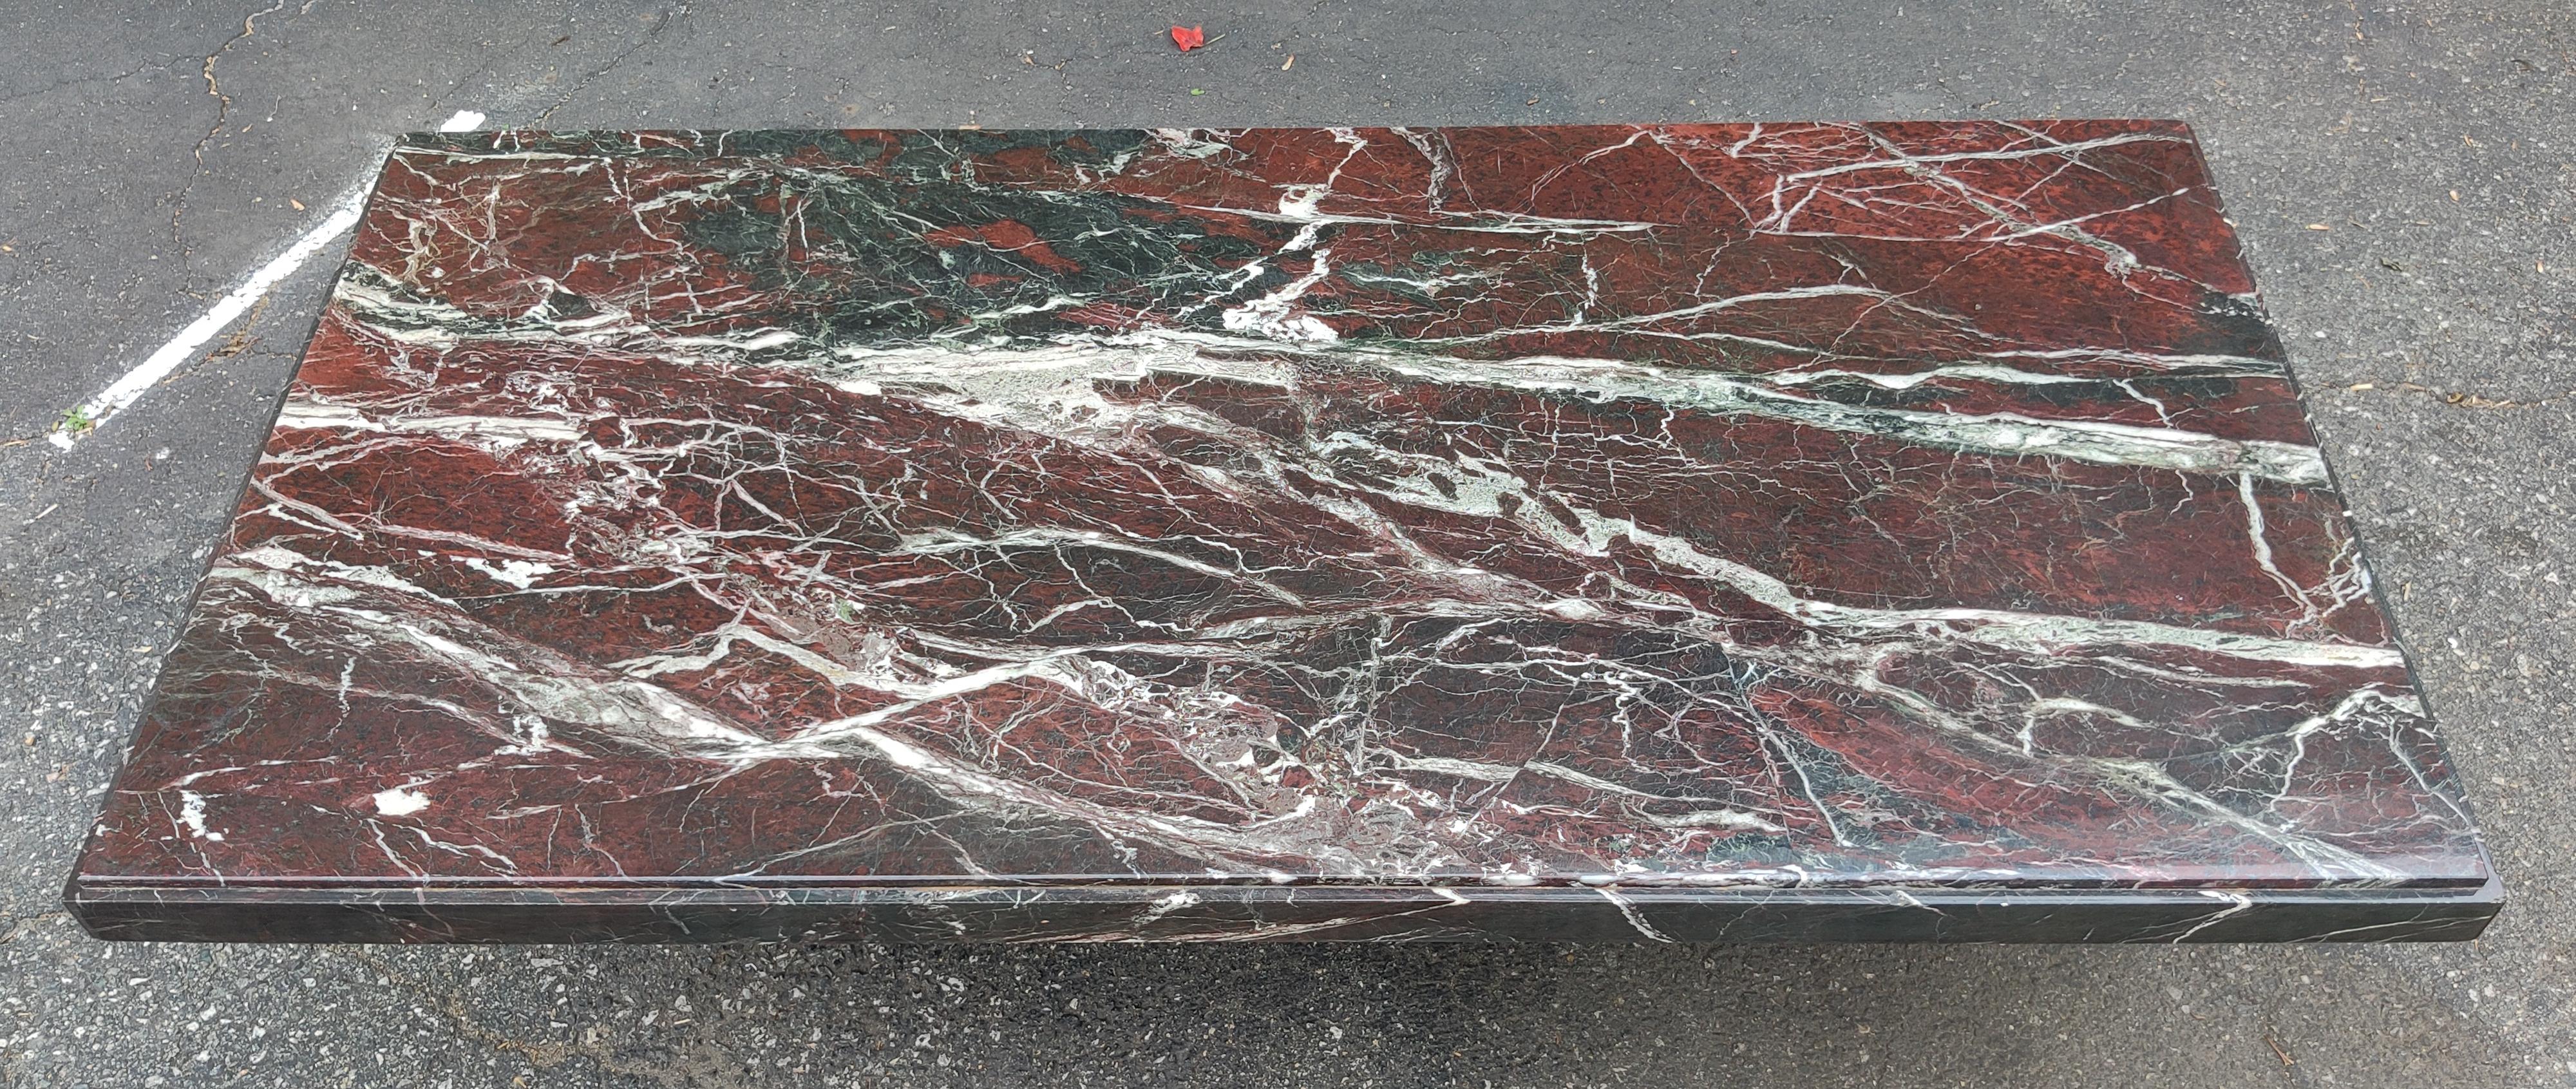 This fantastic coffee table was imported from Italy after its production in the 1970s, and is made of some of the best Rosso Levanto marble we've seen. Typically characterized in a deep red with white streaks, and hints of green, this takes all